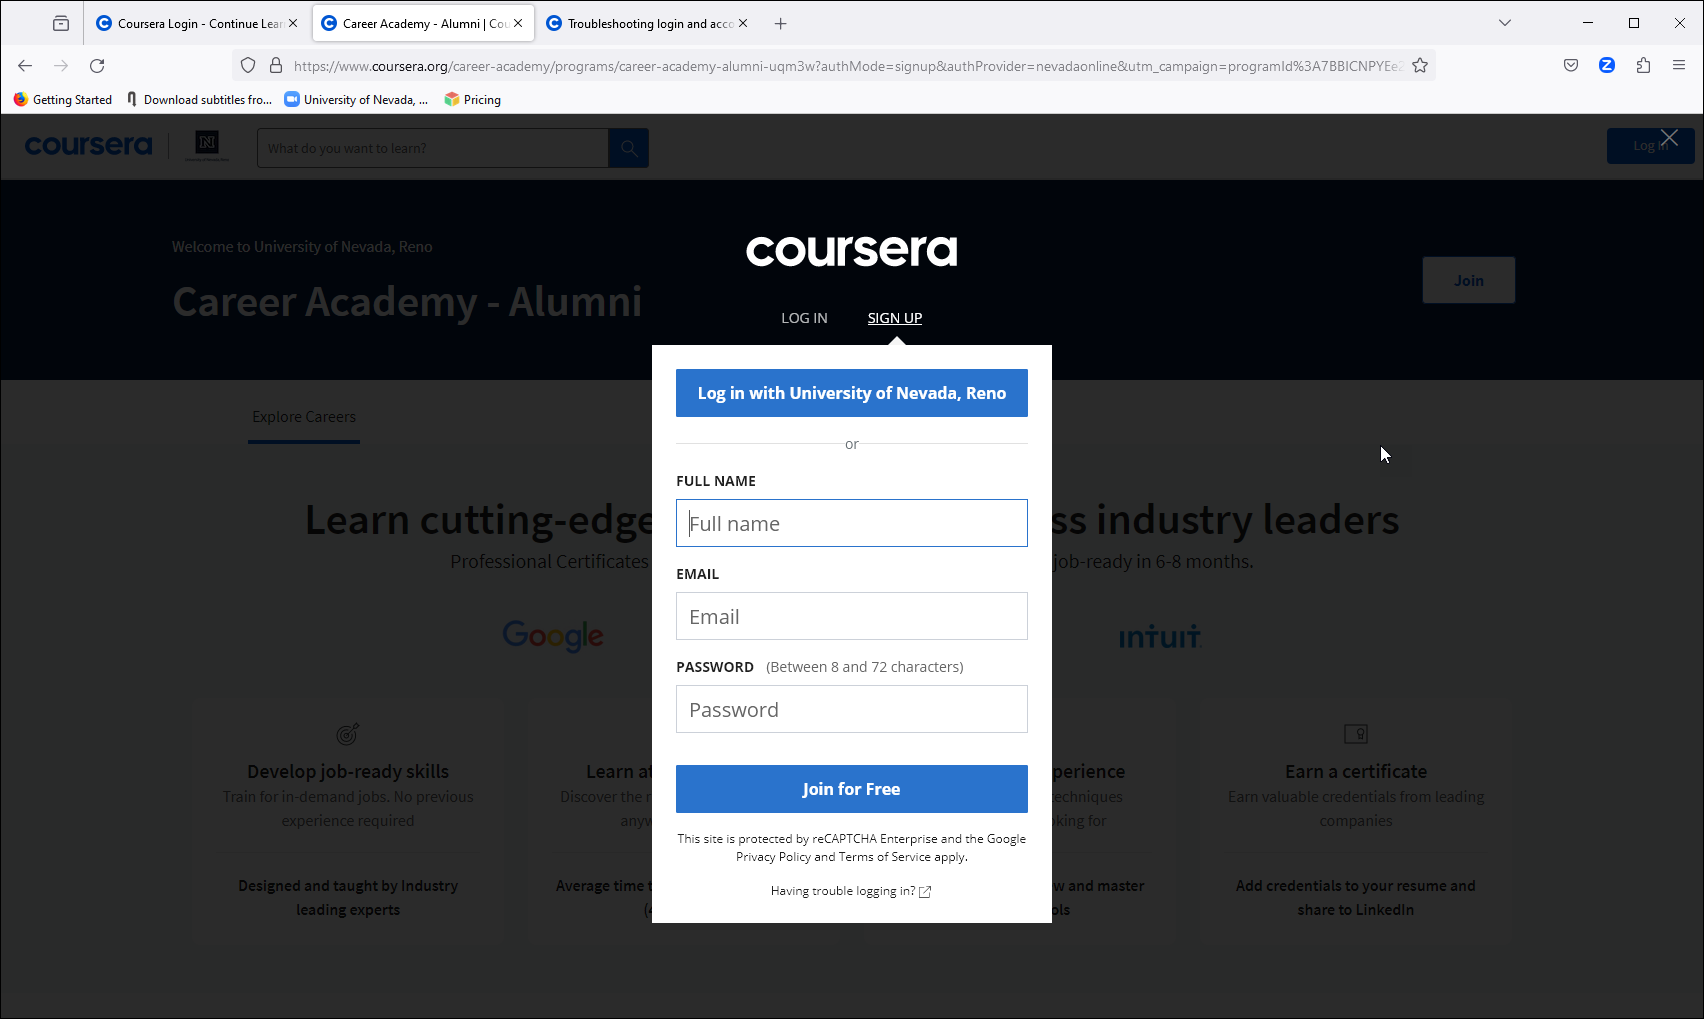 Screen shot of the UNR Coursera interface showing “Sign Up” pop-up.